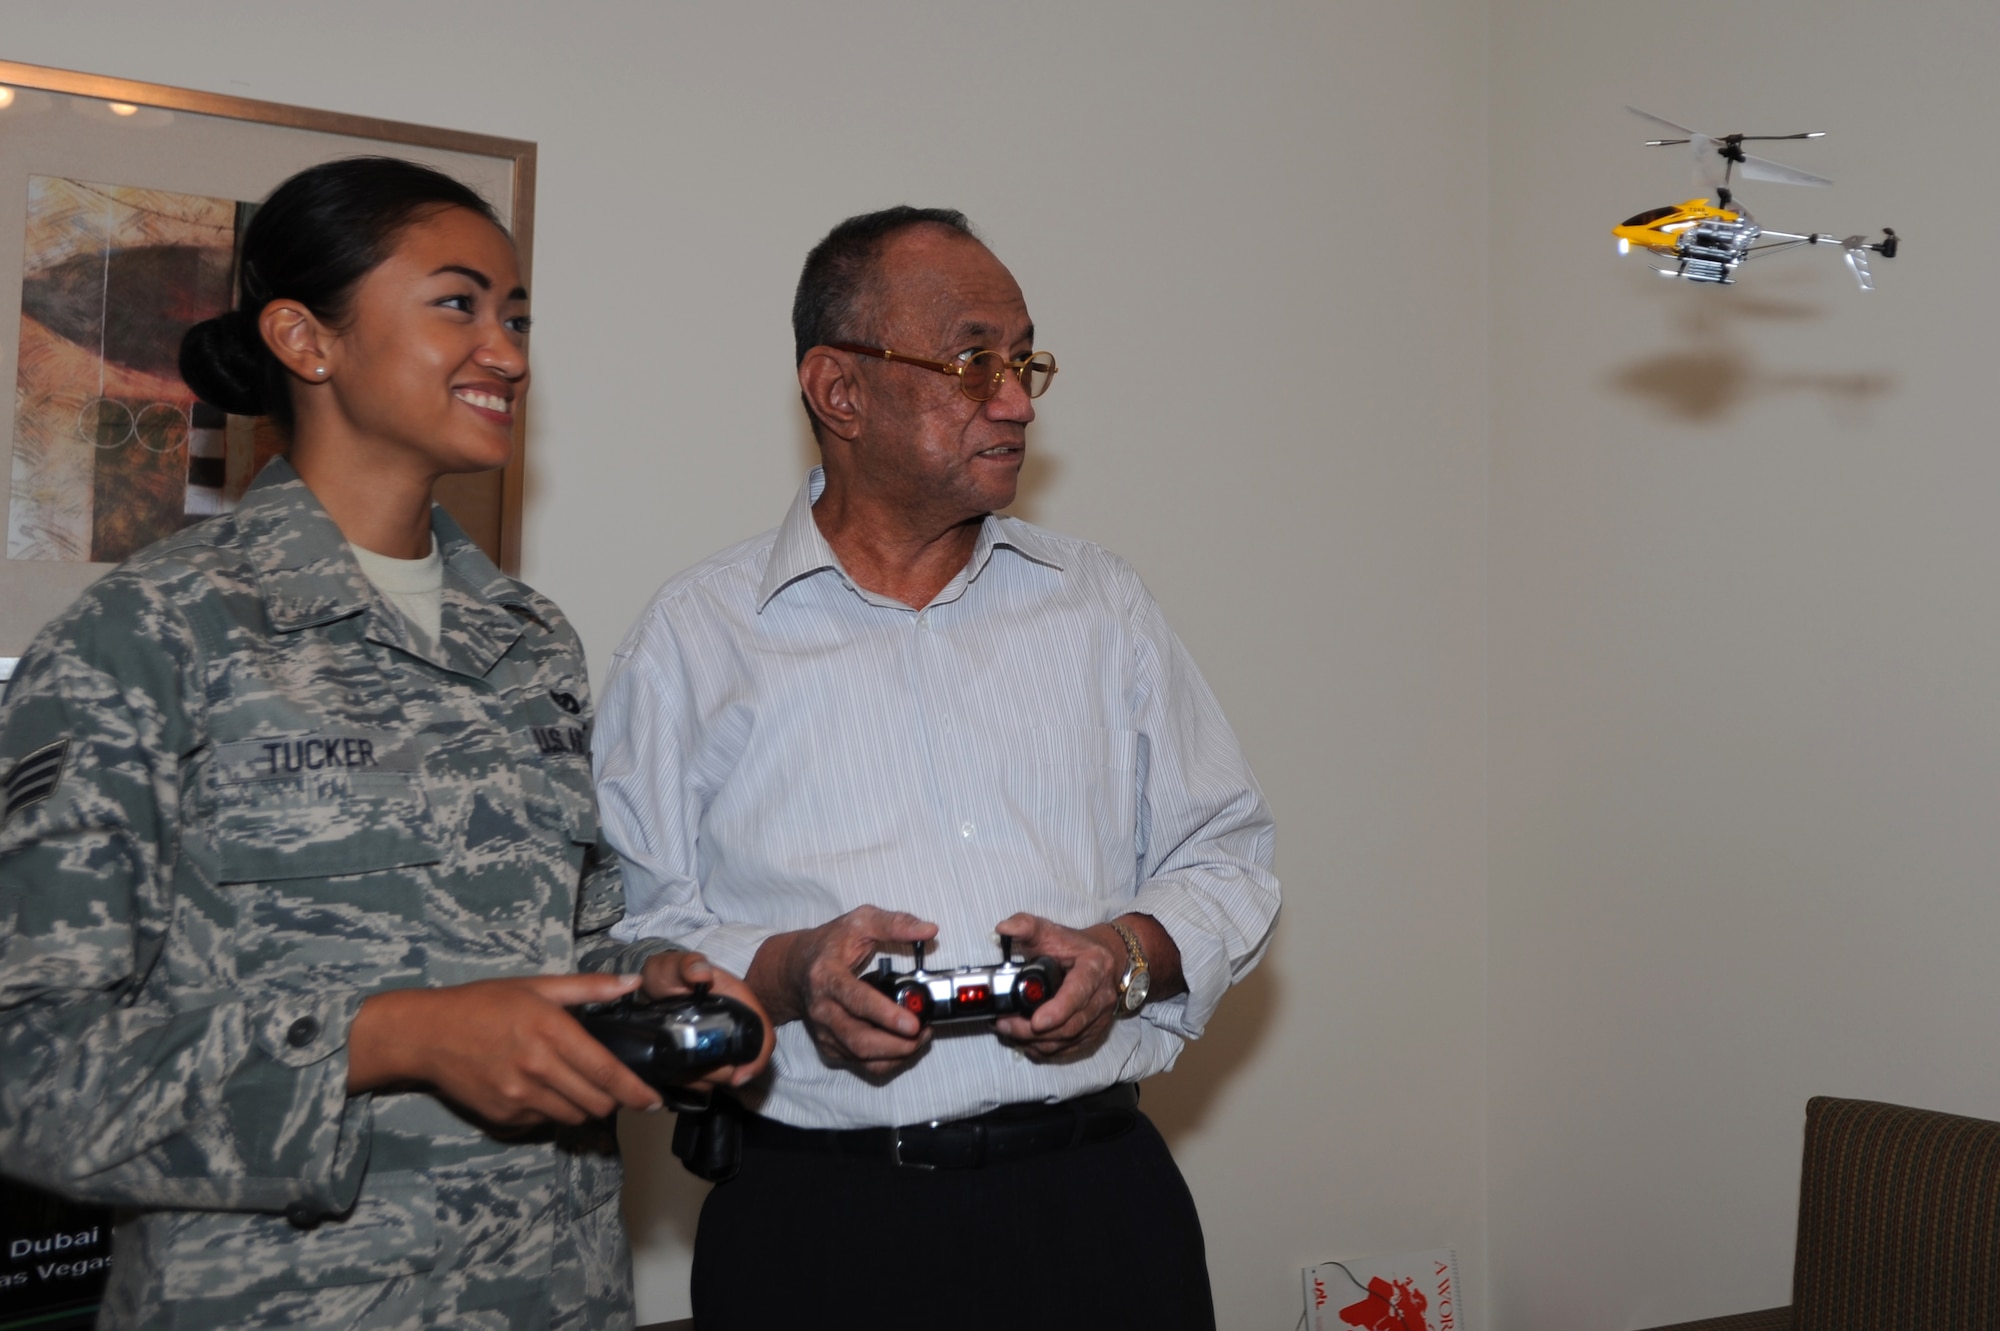 U.S. Air Force Senior Airman Joyce Tucker, 379th Expeditionary Civil Engineer Squadron construction site manager, maneuvers a remote control helicopter with the help of her grandfather, Tito Pagdanganan. Tucker and Pagdanganan met for the first time in 22 years during Tucker?s deployment to Southwest Asia, September, 5, 2012. (U.S. Air Force photo/Staff Sgt. Sheila deVera)